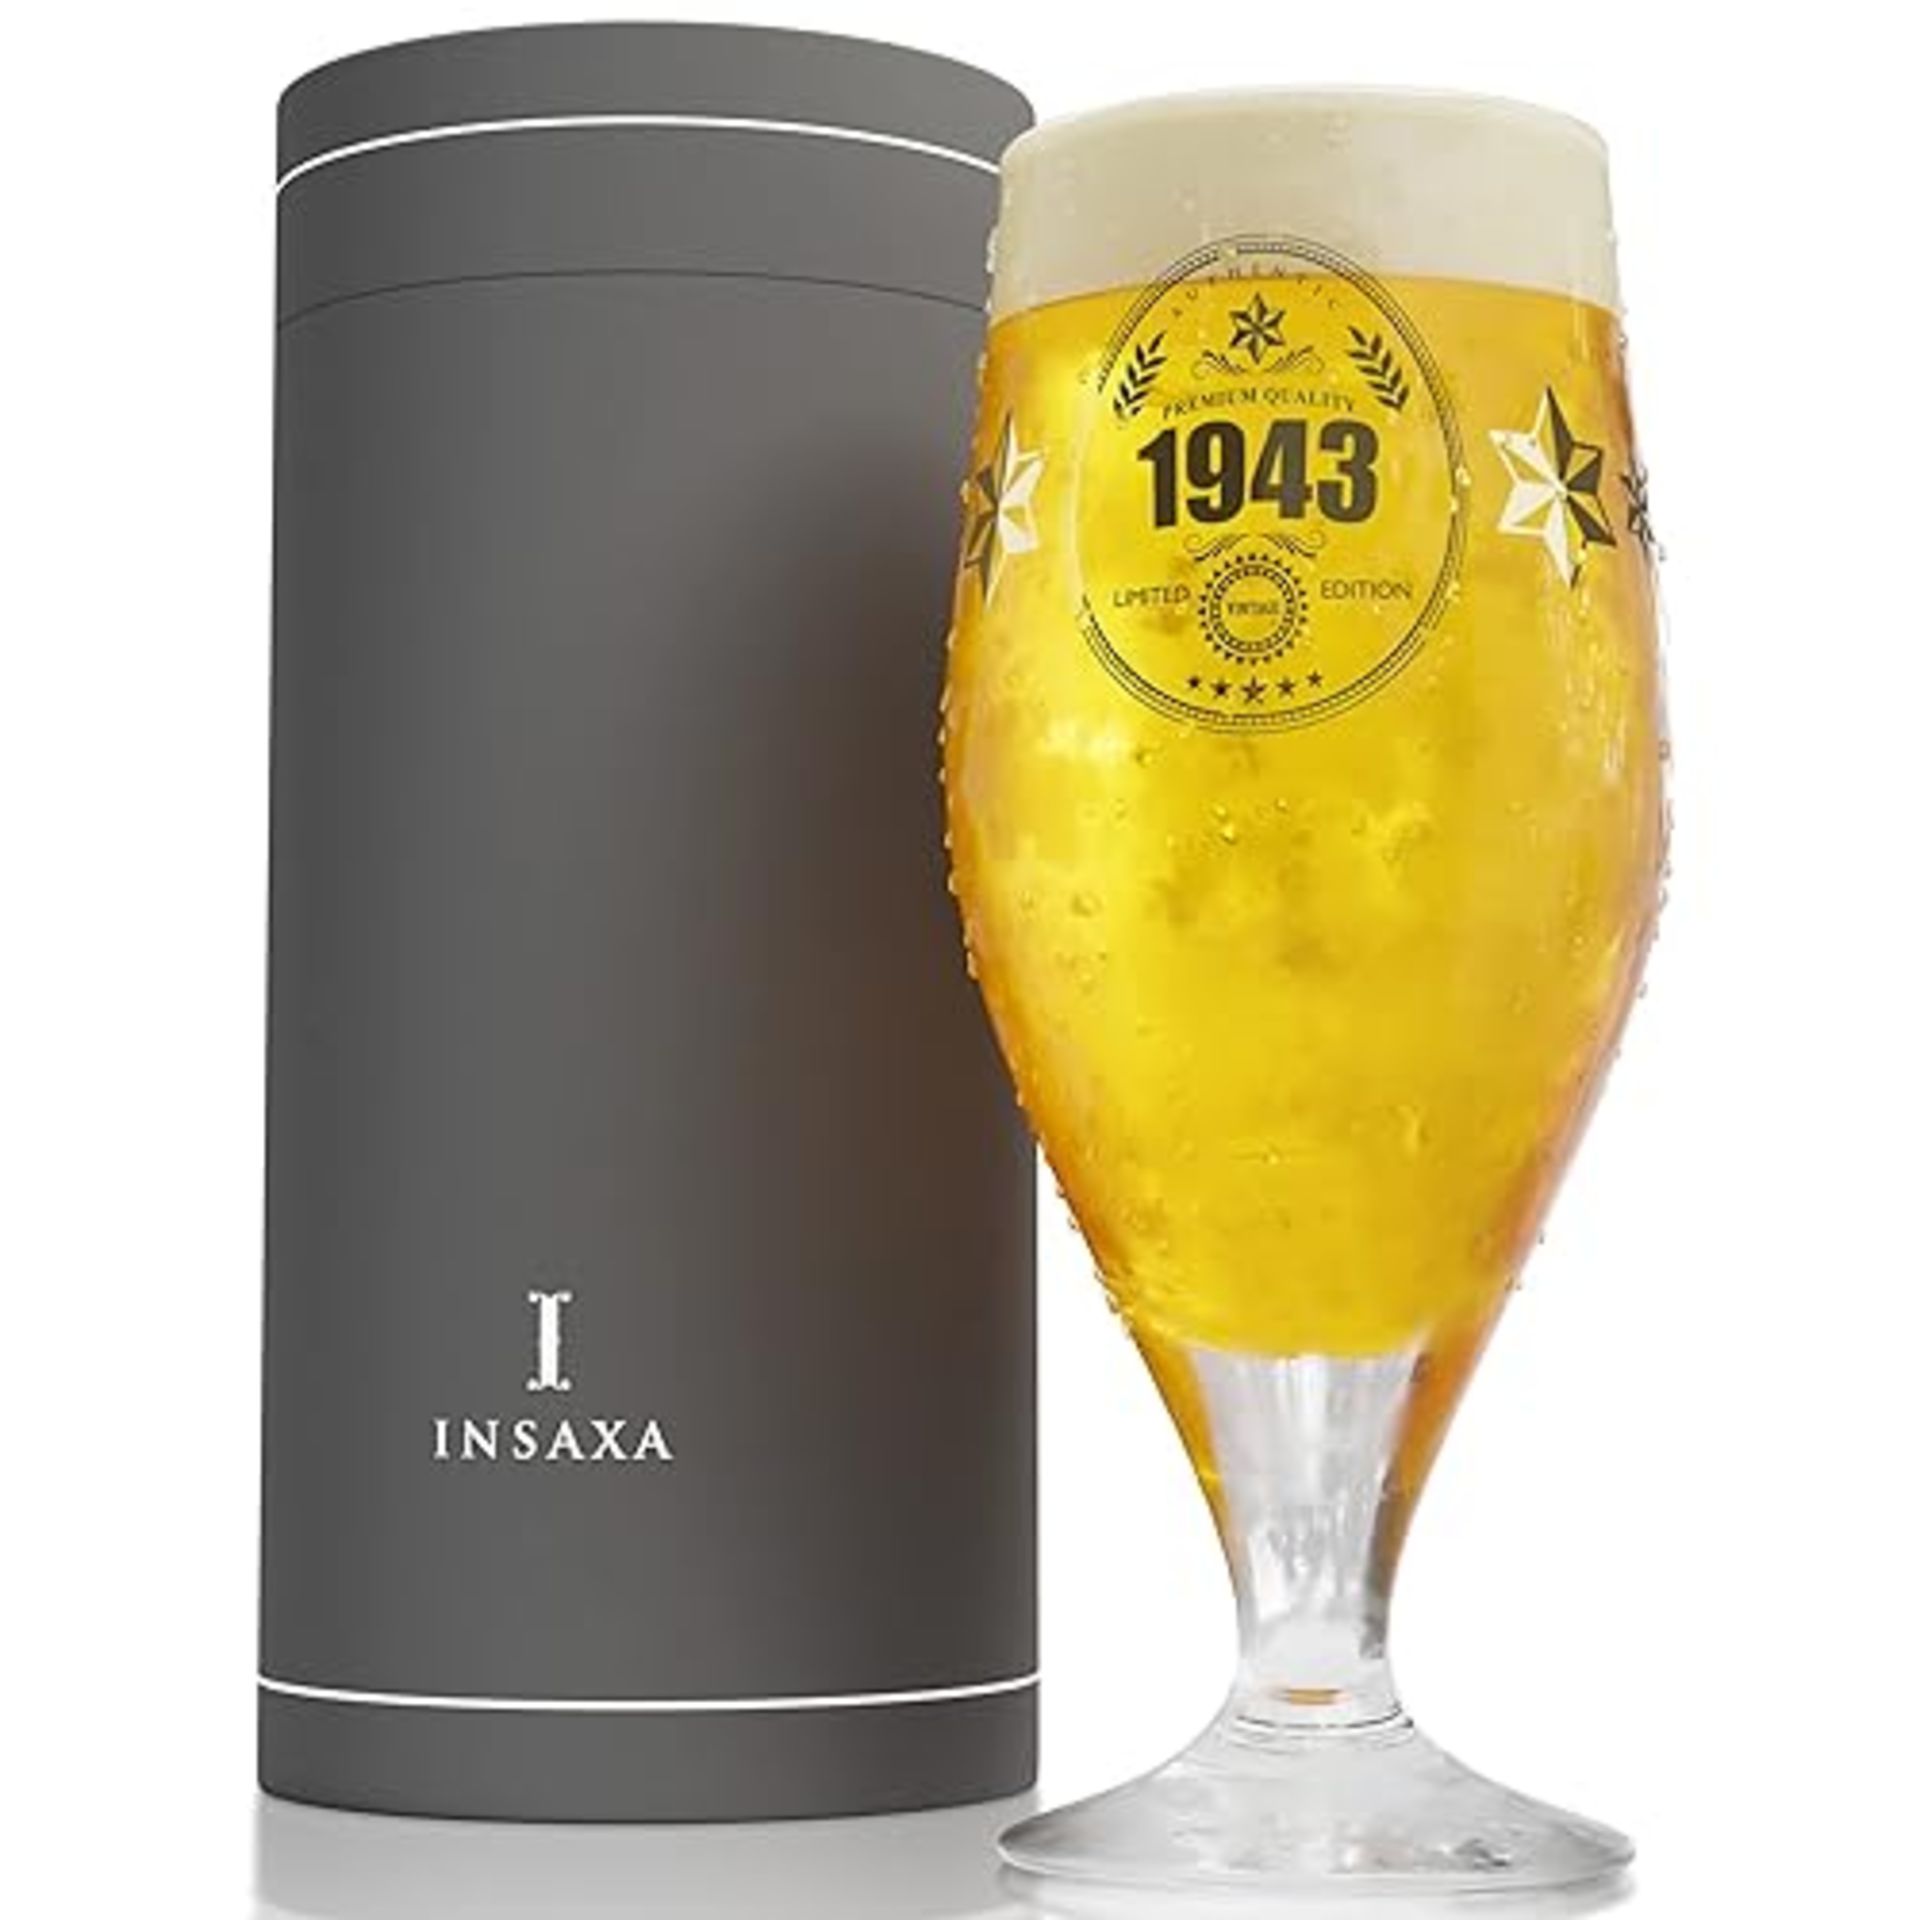 Insaxa 18th Birthday Gifts for Boys - Limited Edition 2005 Premium Quality Beer Glass (1 Pint / 580